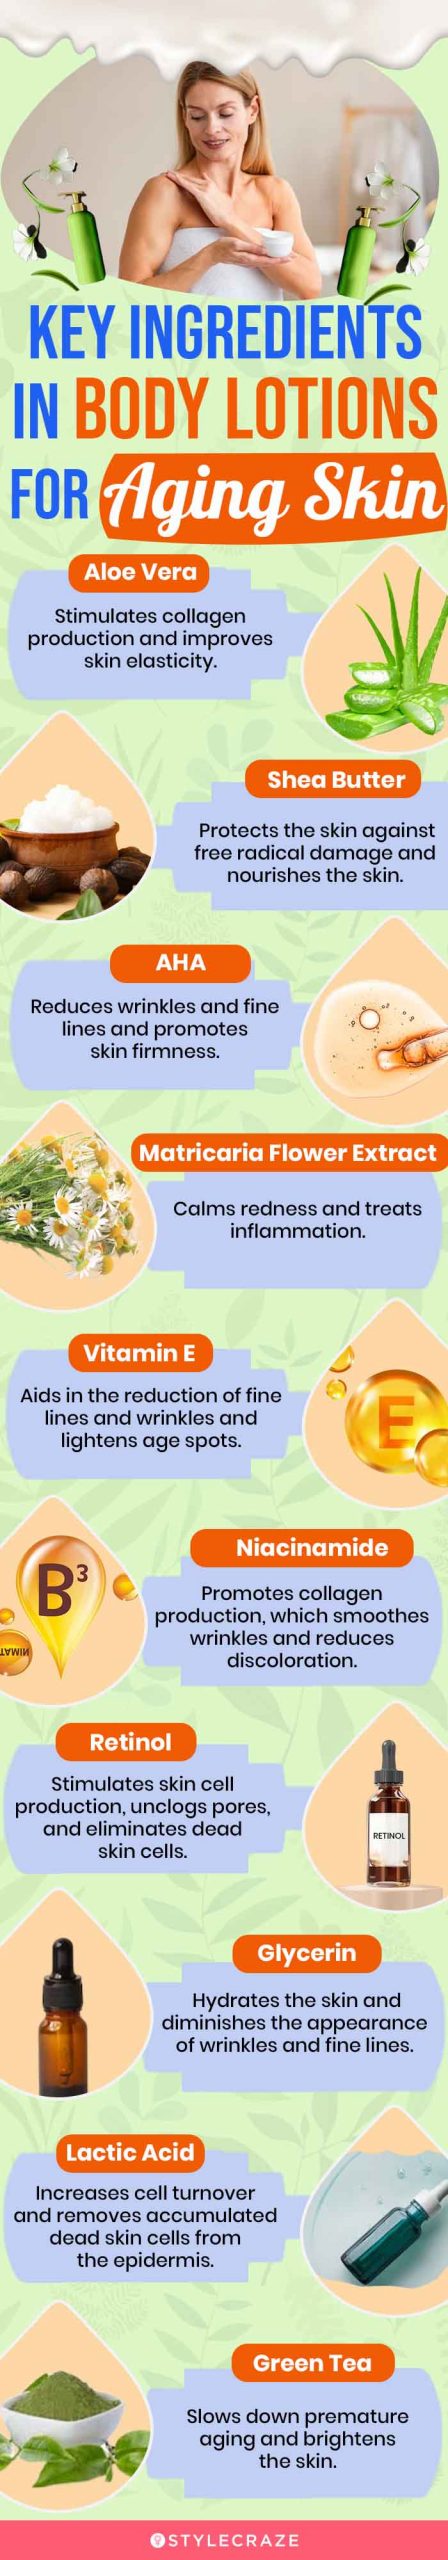 Key Ingredients In Body Lotions For Aging Skin (infographic)